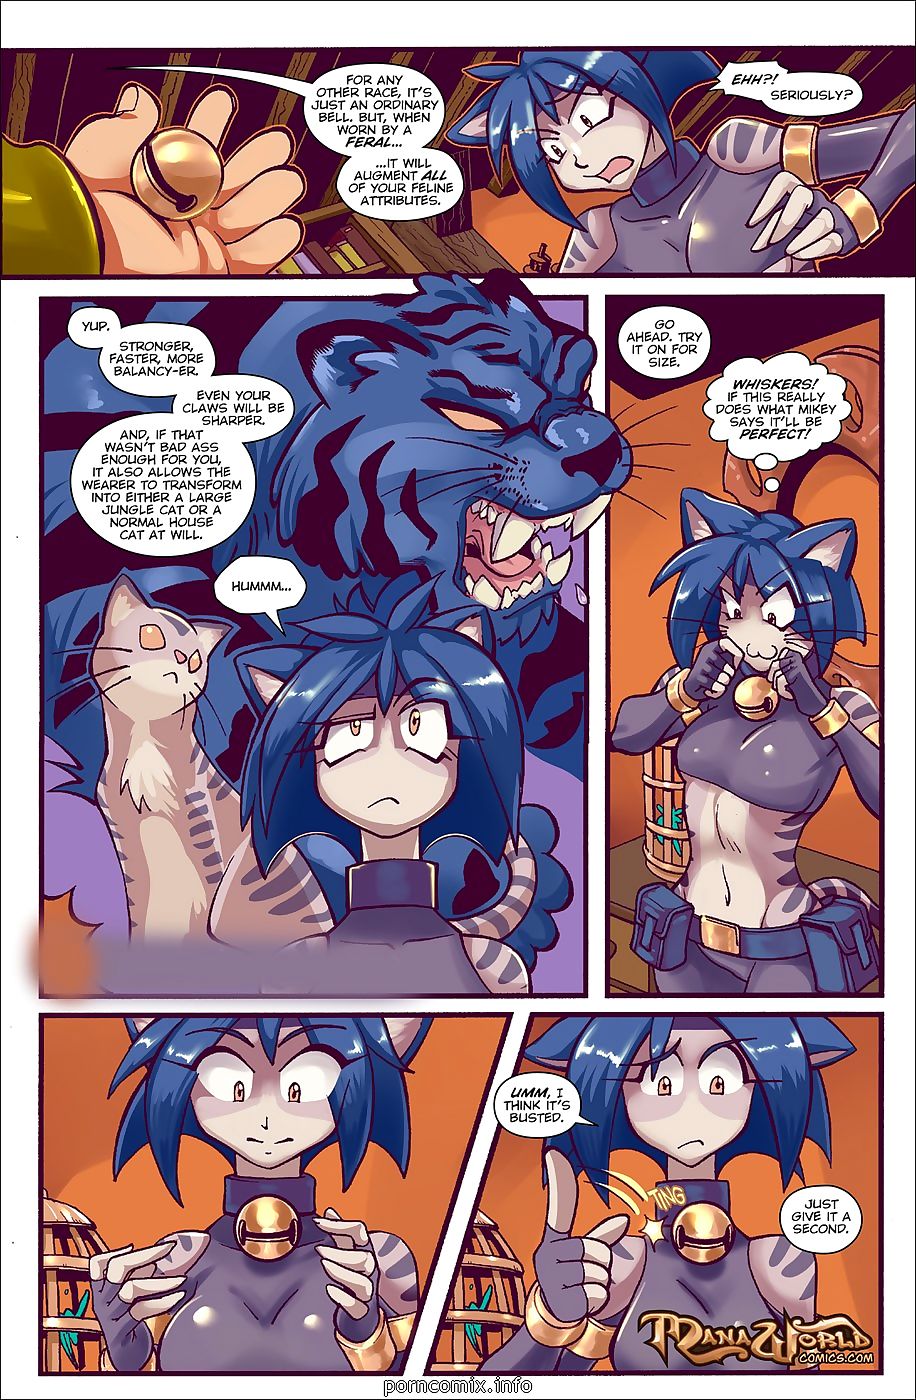 Belling Cat Girl page 1